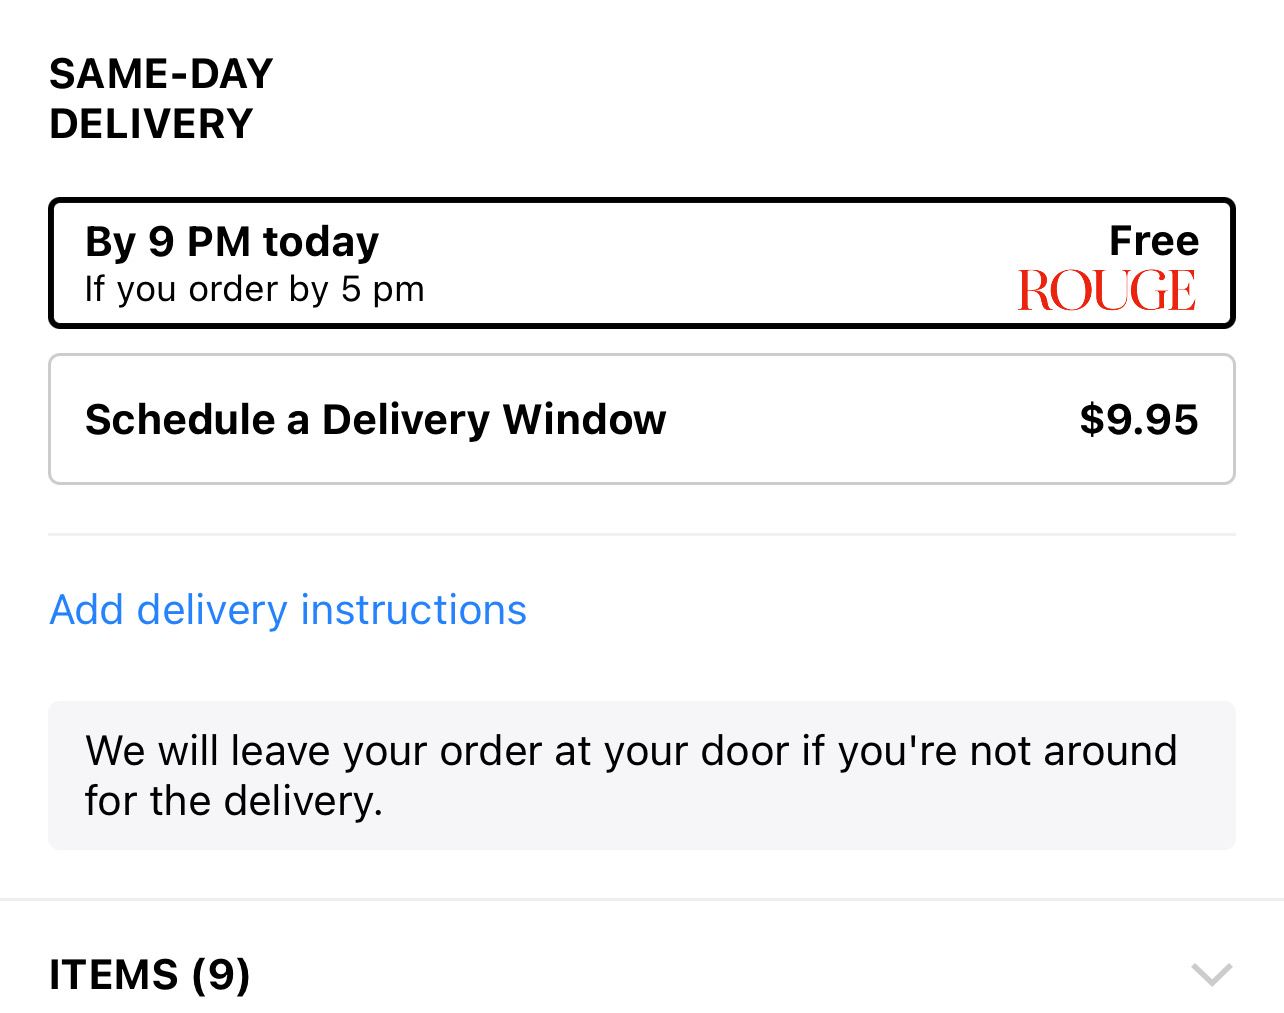 Same - Day Delivery Cut Off Time Issue - Beauty Insider Community